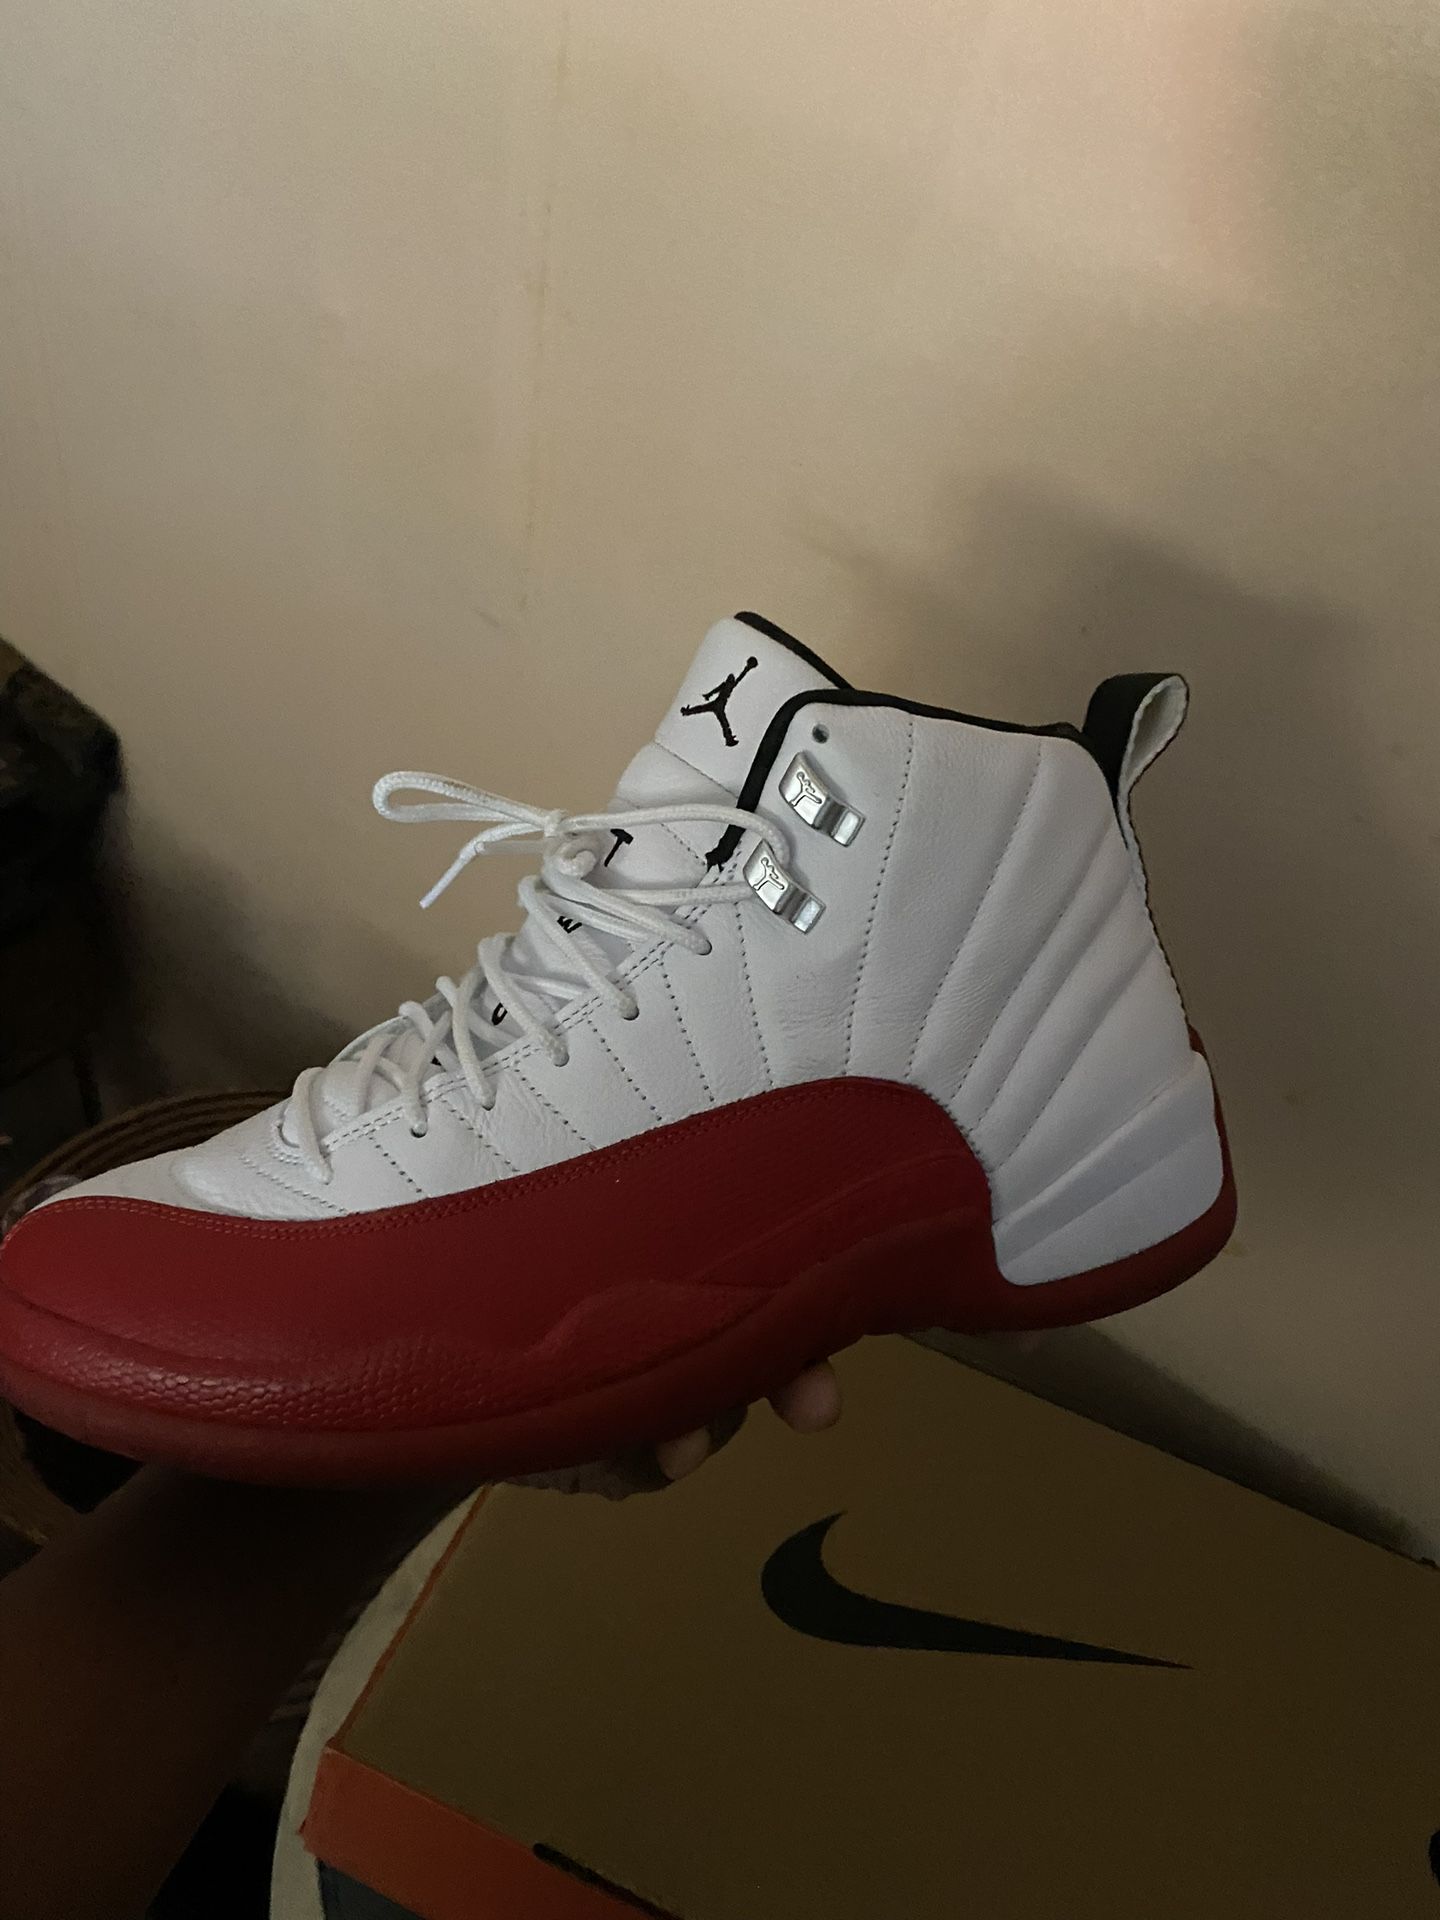 White And Red Jordan’s 10.5 Hml